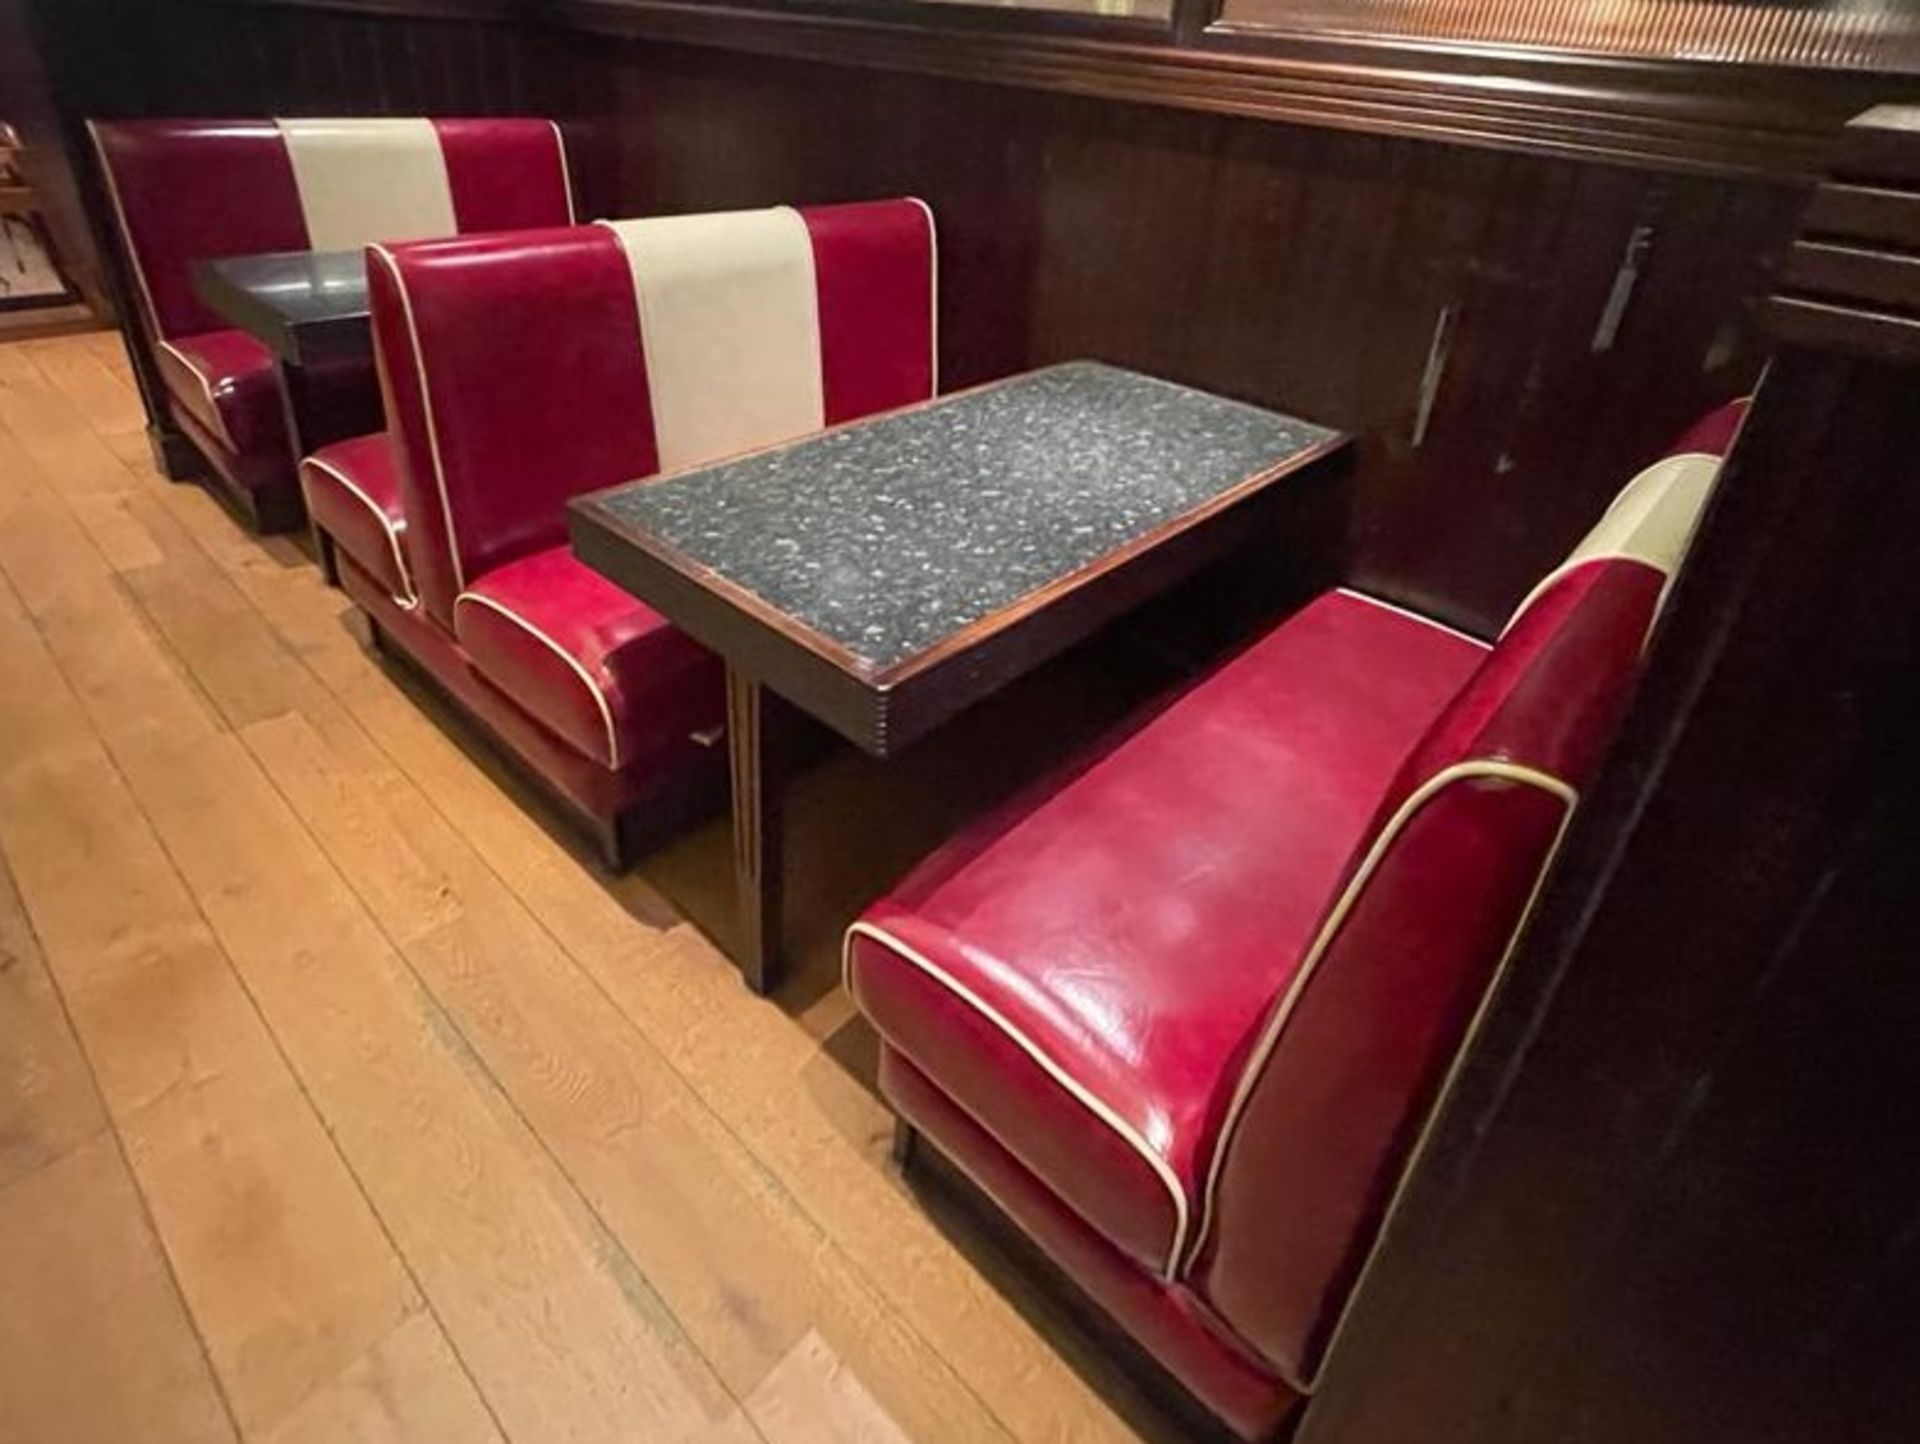 Selection of Double Seating Benches and Dining Tables to Seat Upto 8 Persons - Retro 1950's American